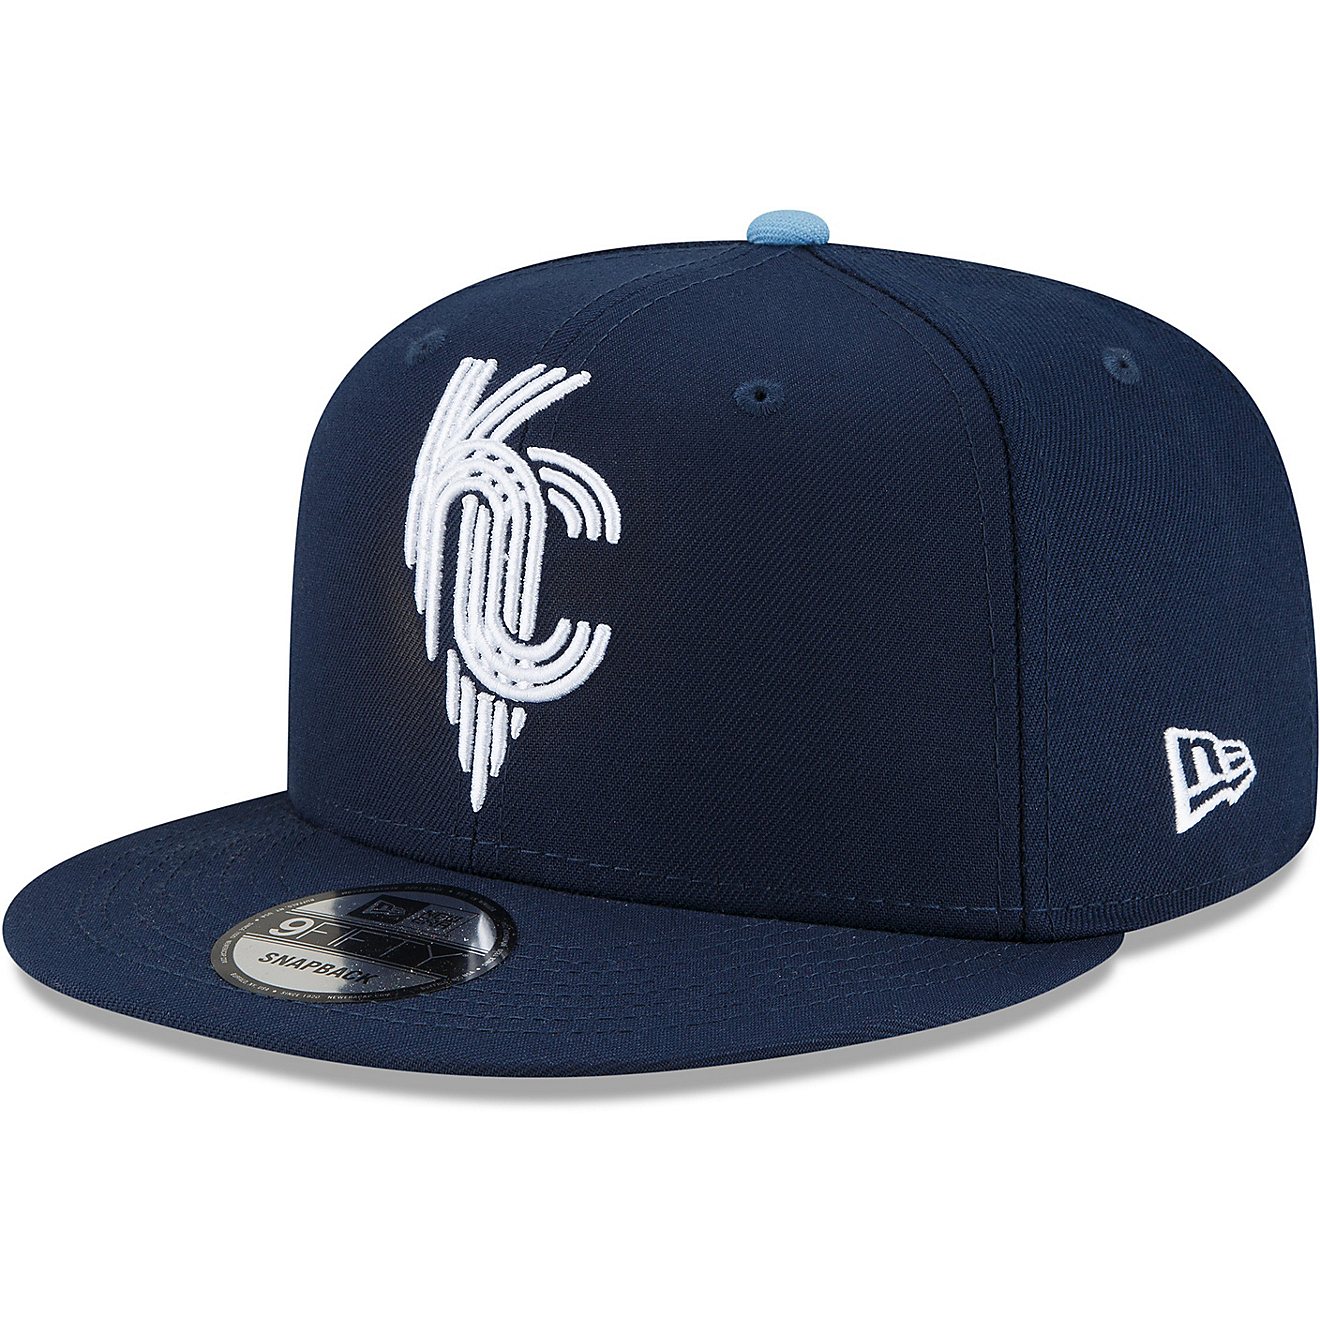 New Era Youth Kansas City Royals City Connect 9FIFTY Cap                                                                         - view number 8